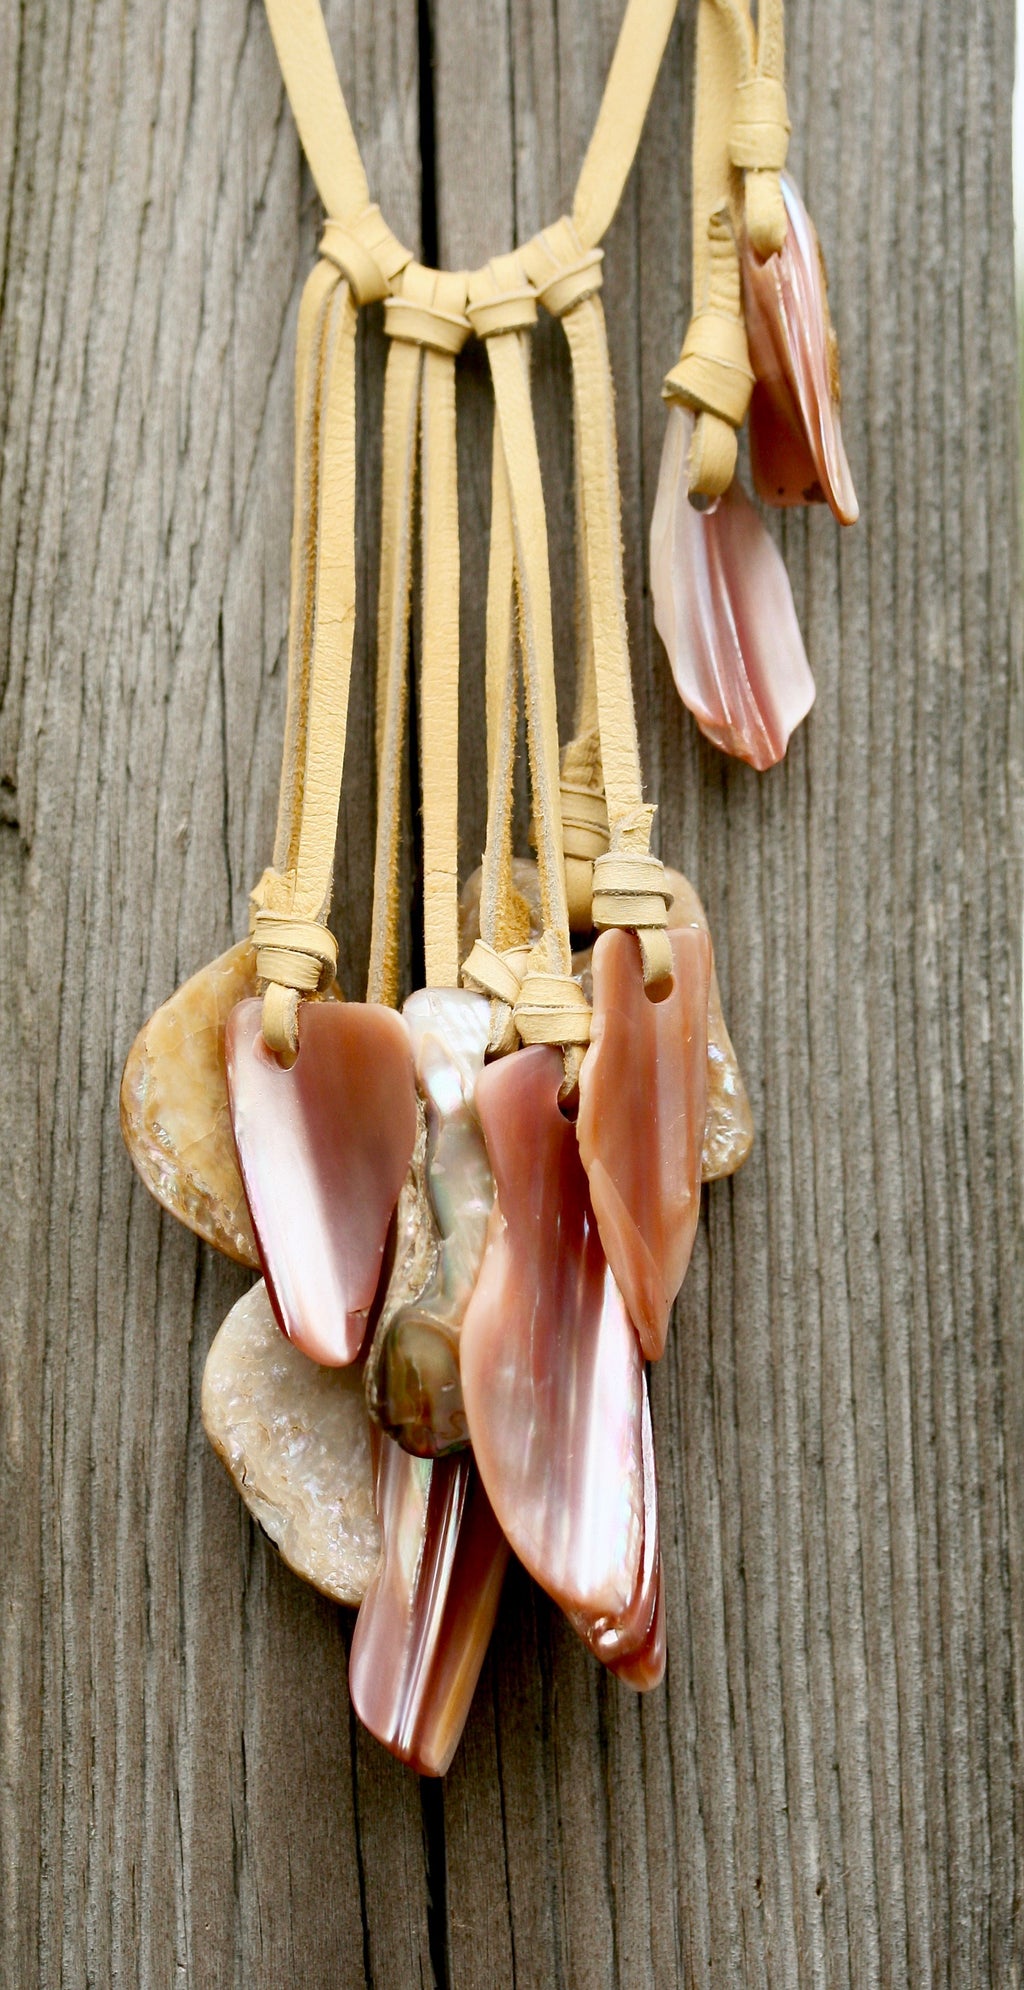 Abalone, Pink Mussel On Lace Necklace